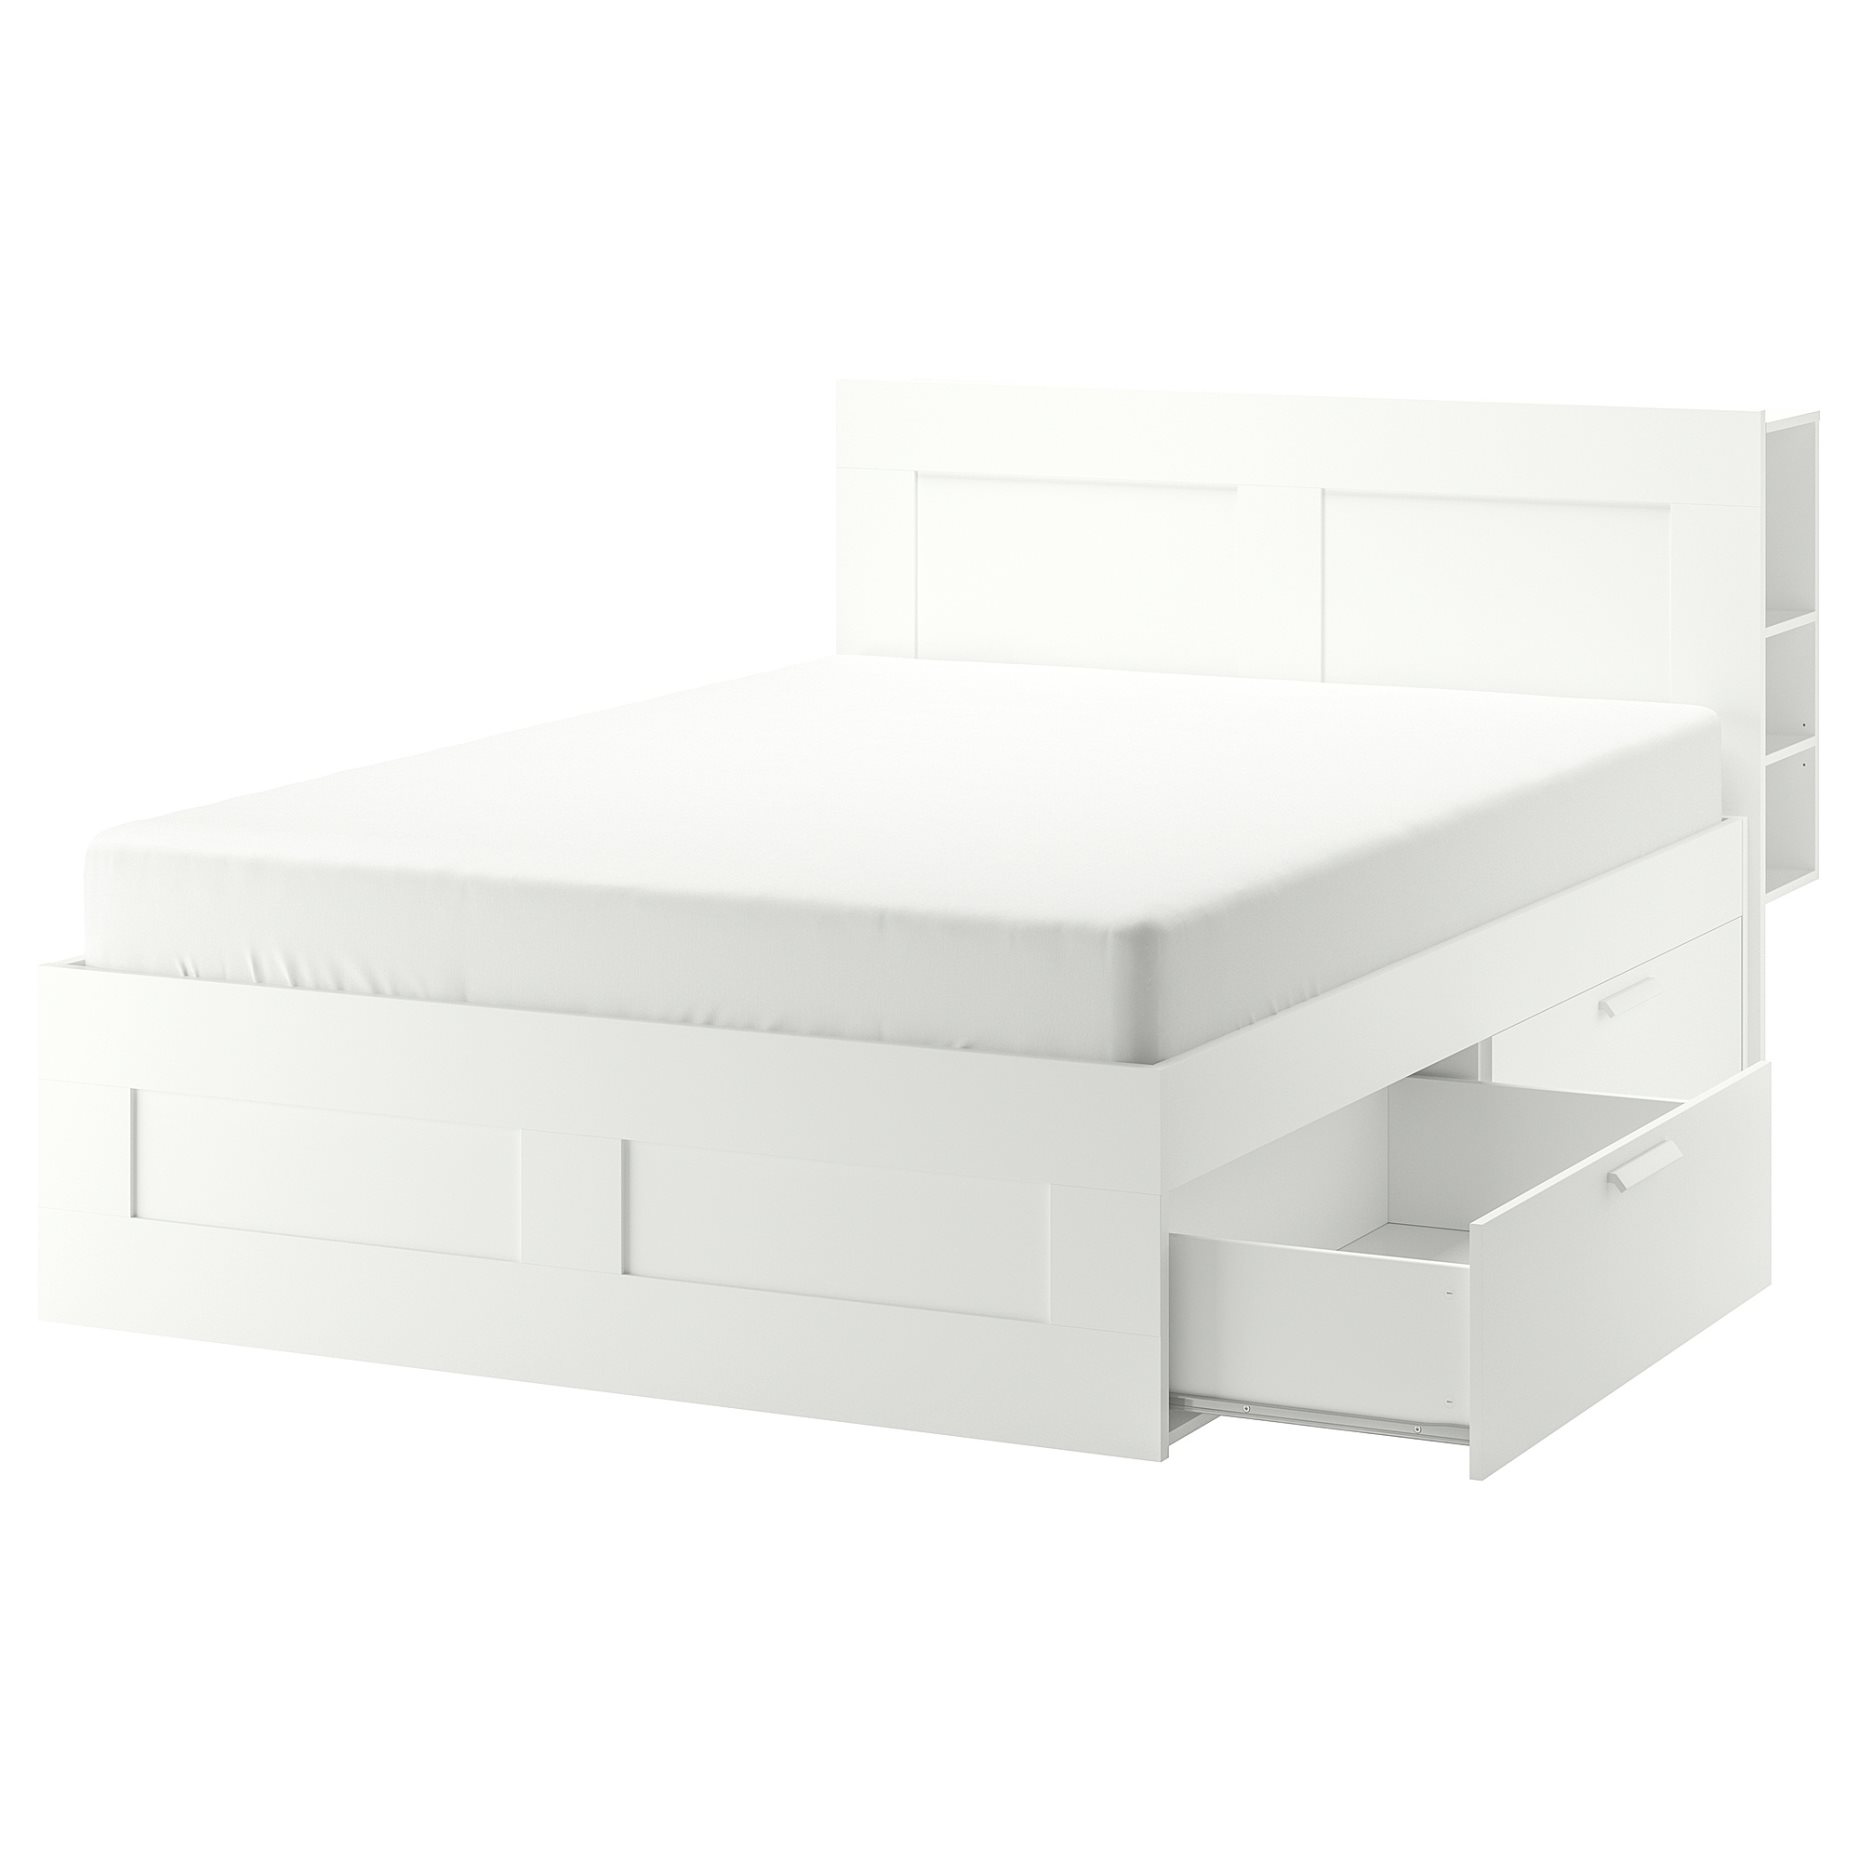 BRIMNES, bed frame with storage and headboard, 160X200 cm, 590.991.55